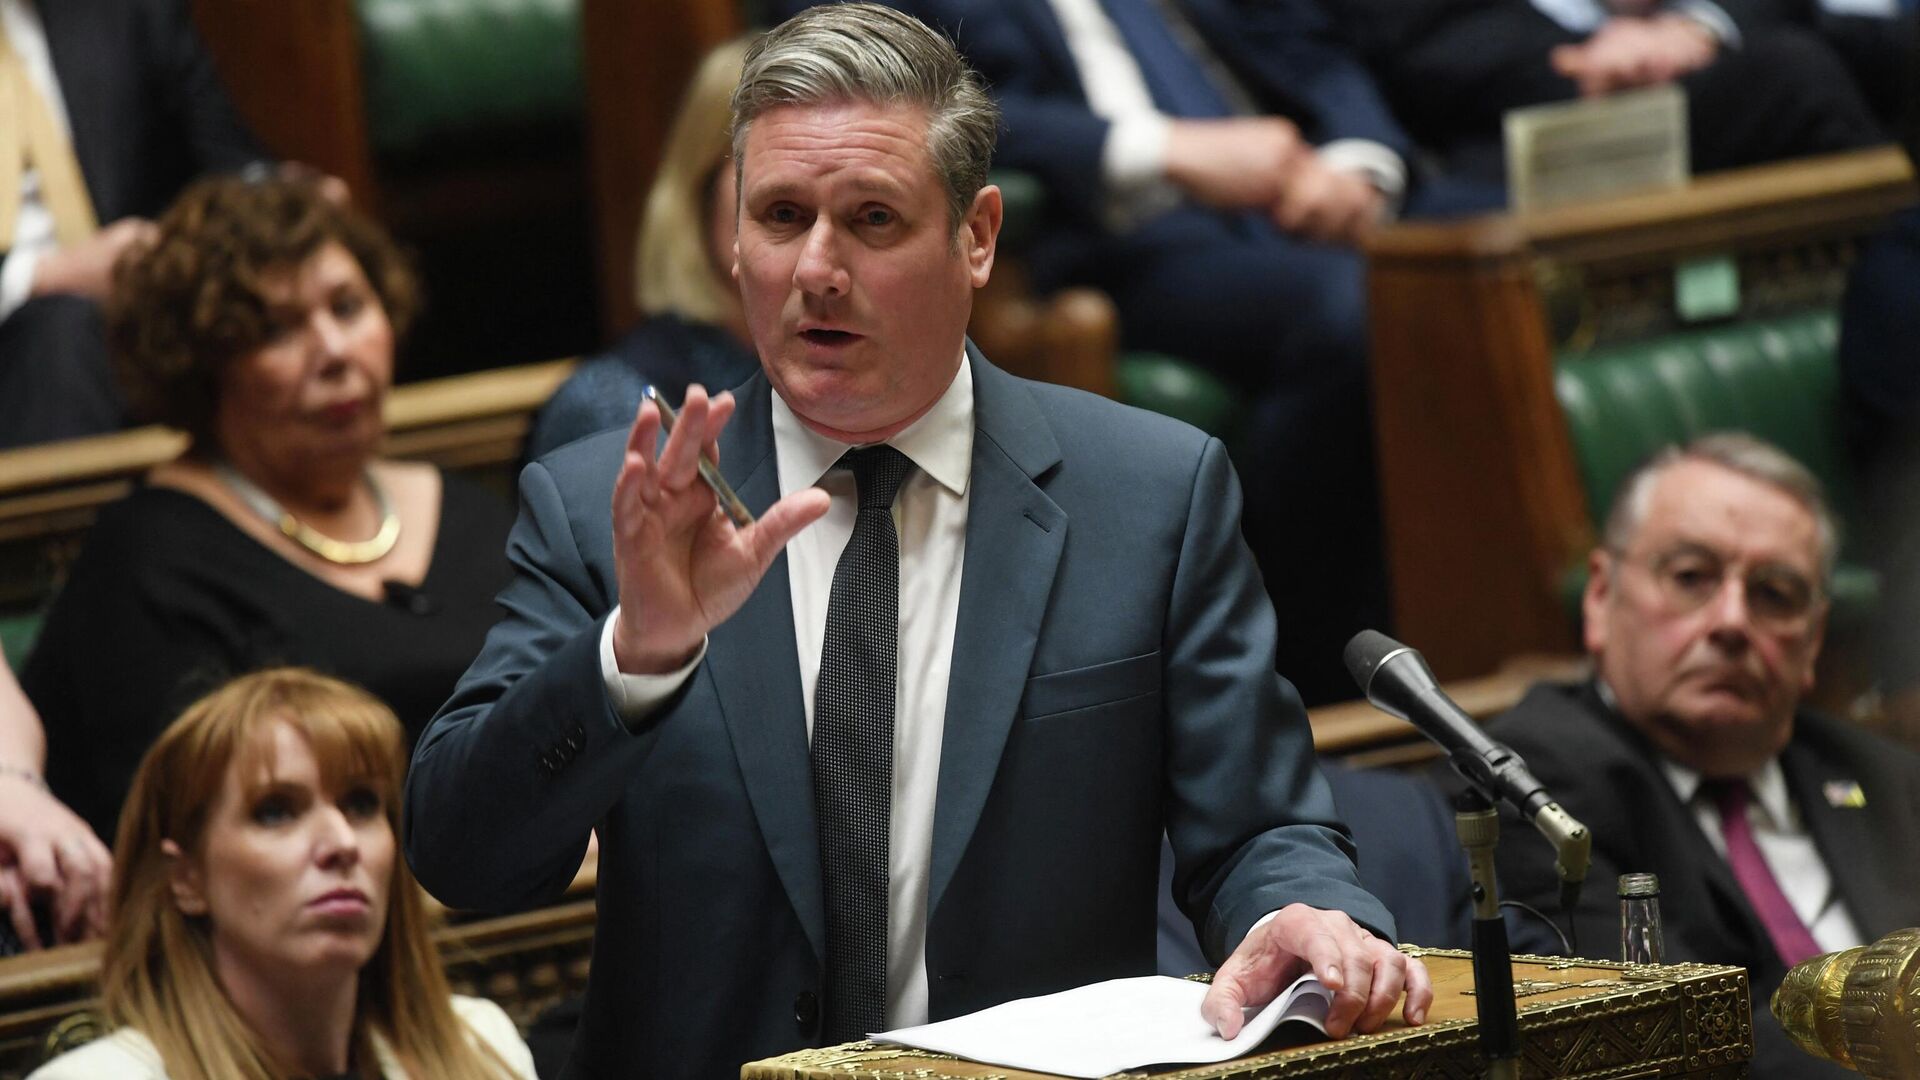 A handout photograph released by the UK Parliament shows Britain's main opposition Labour Party leader Keir Starmer speaking in the House of Commons in London on April 21, 2022, during a debate on whether the prime minister misled the House on lockdown parties - Sputnik International, 1920, 09.05.2022